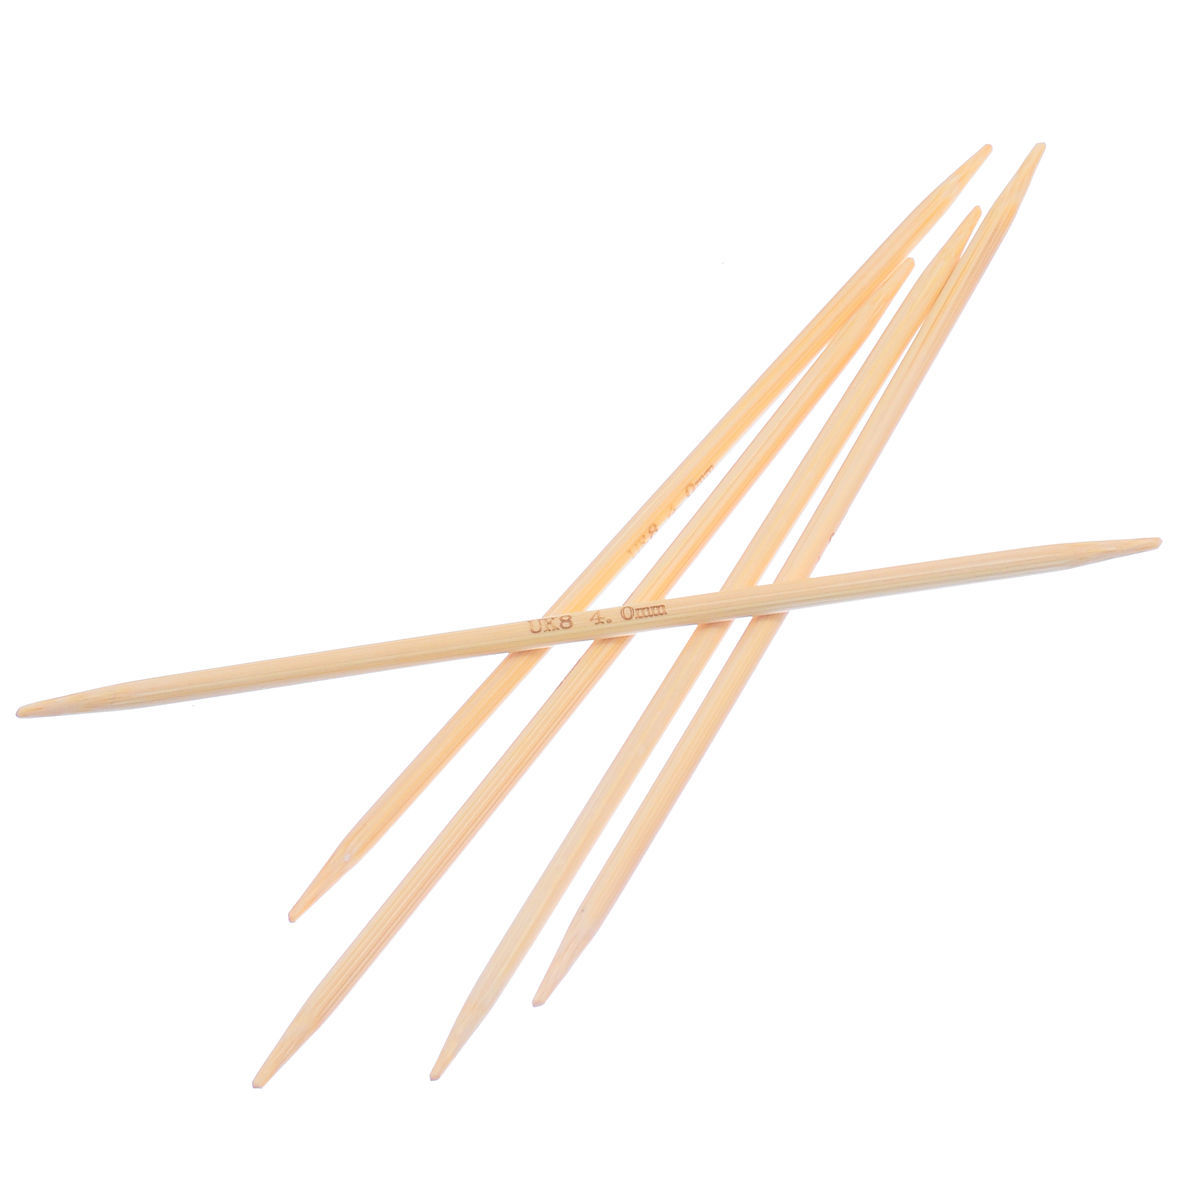 Picture of (UK8 4.0mm) Bamboo Double Pointed Knitting Needles Natural 15cm(5 7/8") long, 1 Set ( 5 PCs/Set)